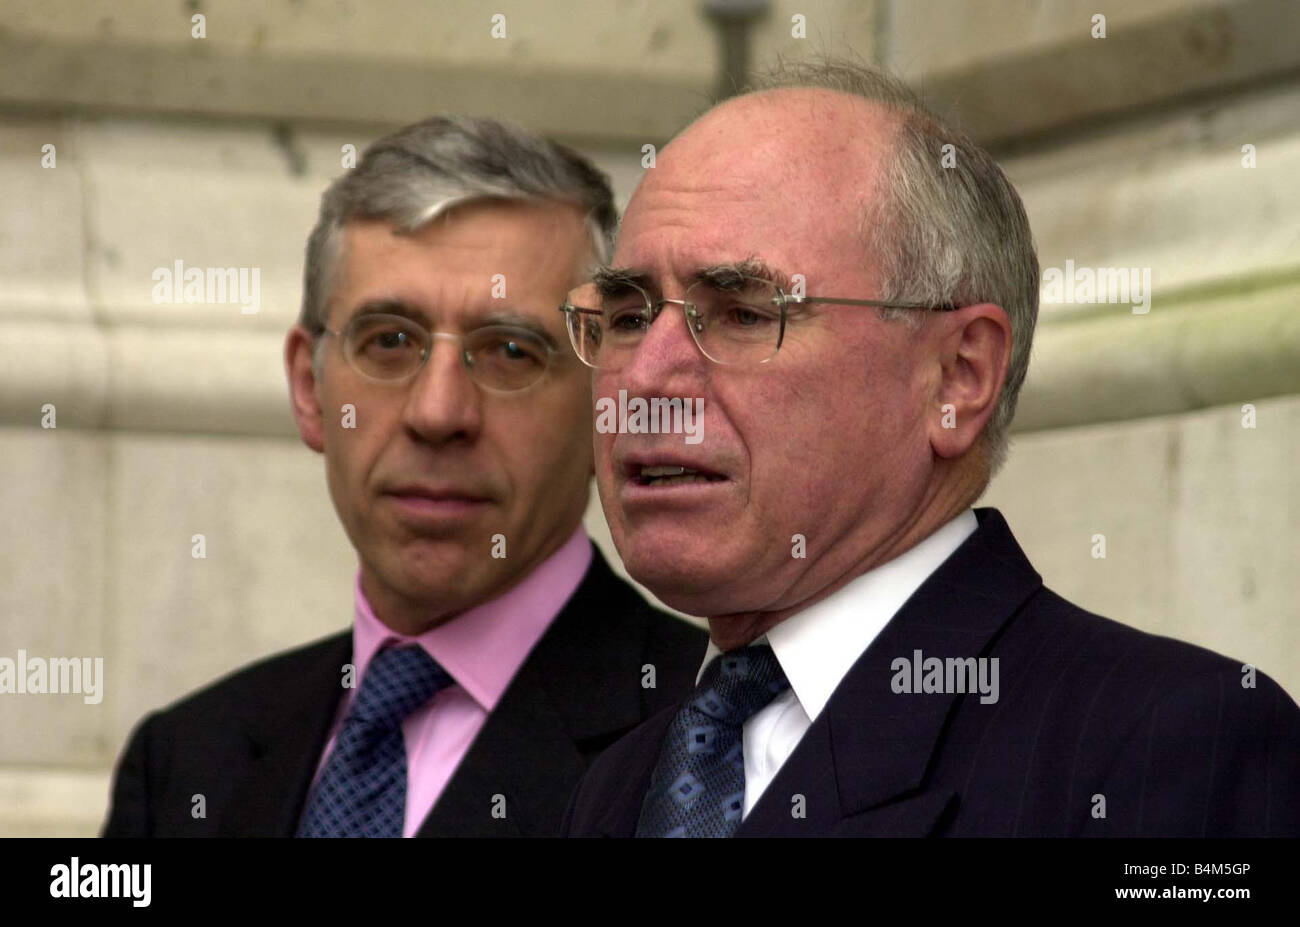 Australian Prime Minister John Howard R March 2002 holds a news conference with Britain s Foreign Secretary Jack Straw The Commonwealth has saved its reputation by taking a tough line against Zimbabwe Howard said His meeting with Nigerian President Olusegun Obasanjo and South African President Thabo Mbeki had been widely expected to delay any action against Zimbabwean President Robert Mugabe whose controversial re election last week had split the group of 54 mainly former British colonies down racial lines Stock Photo